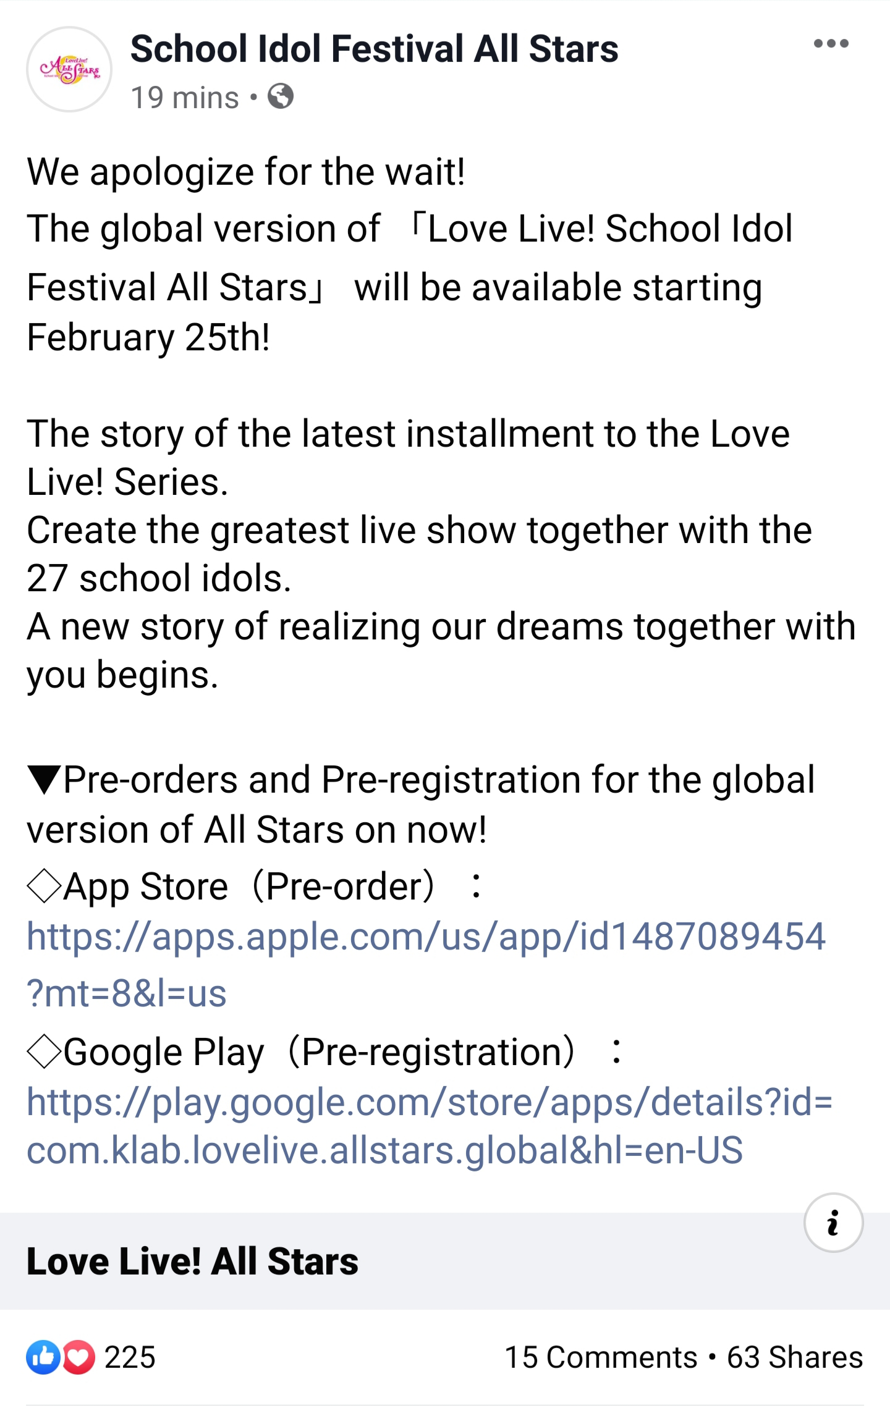 The official SIF All Stars Facebook page has finally confirmed February 25 as the official global...